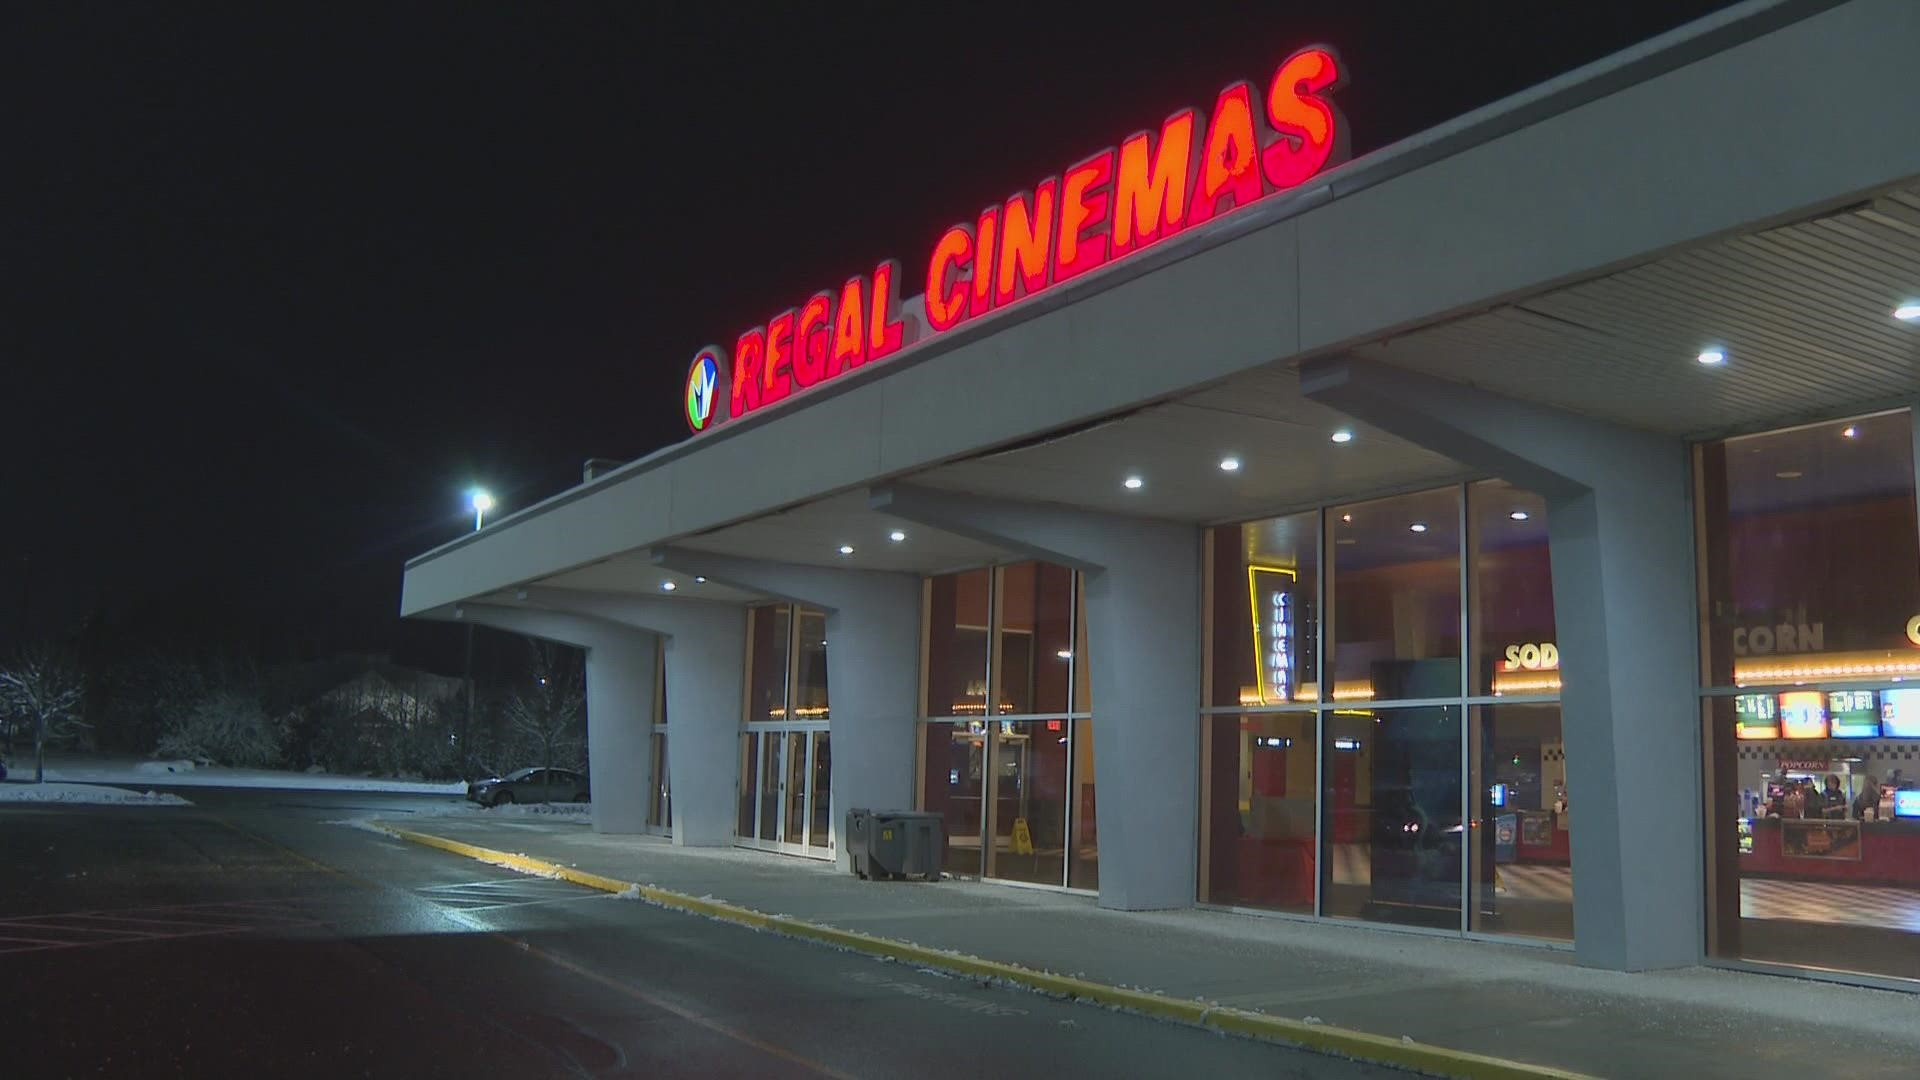 Regal Cinemas says it will close 39 movie theaters across the country next month.